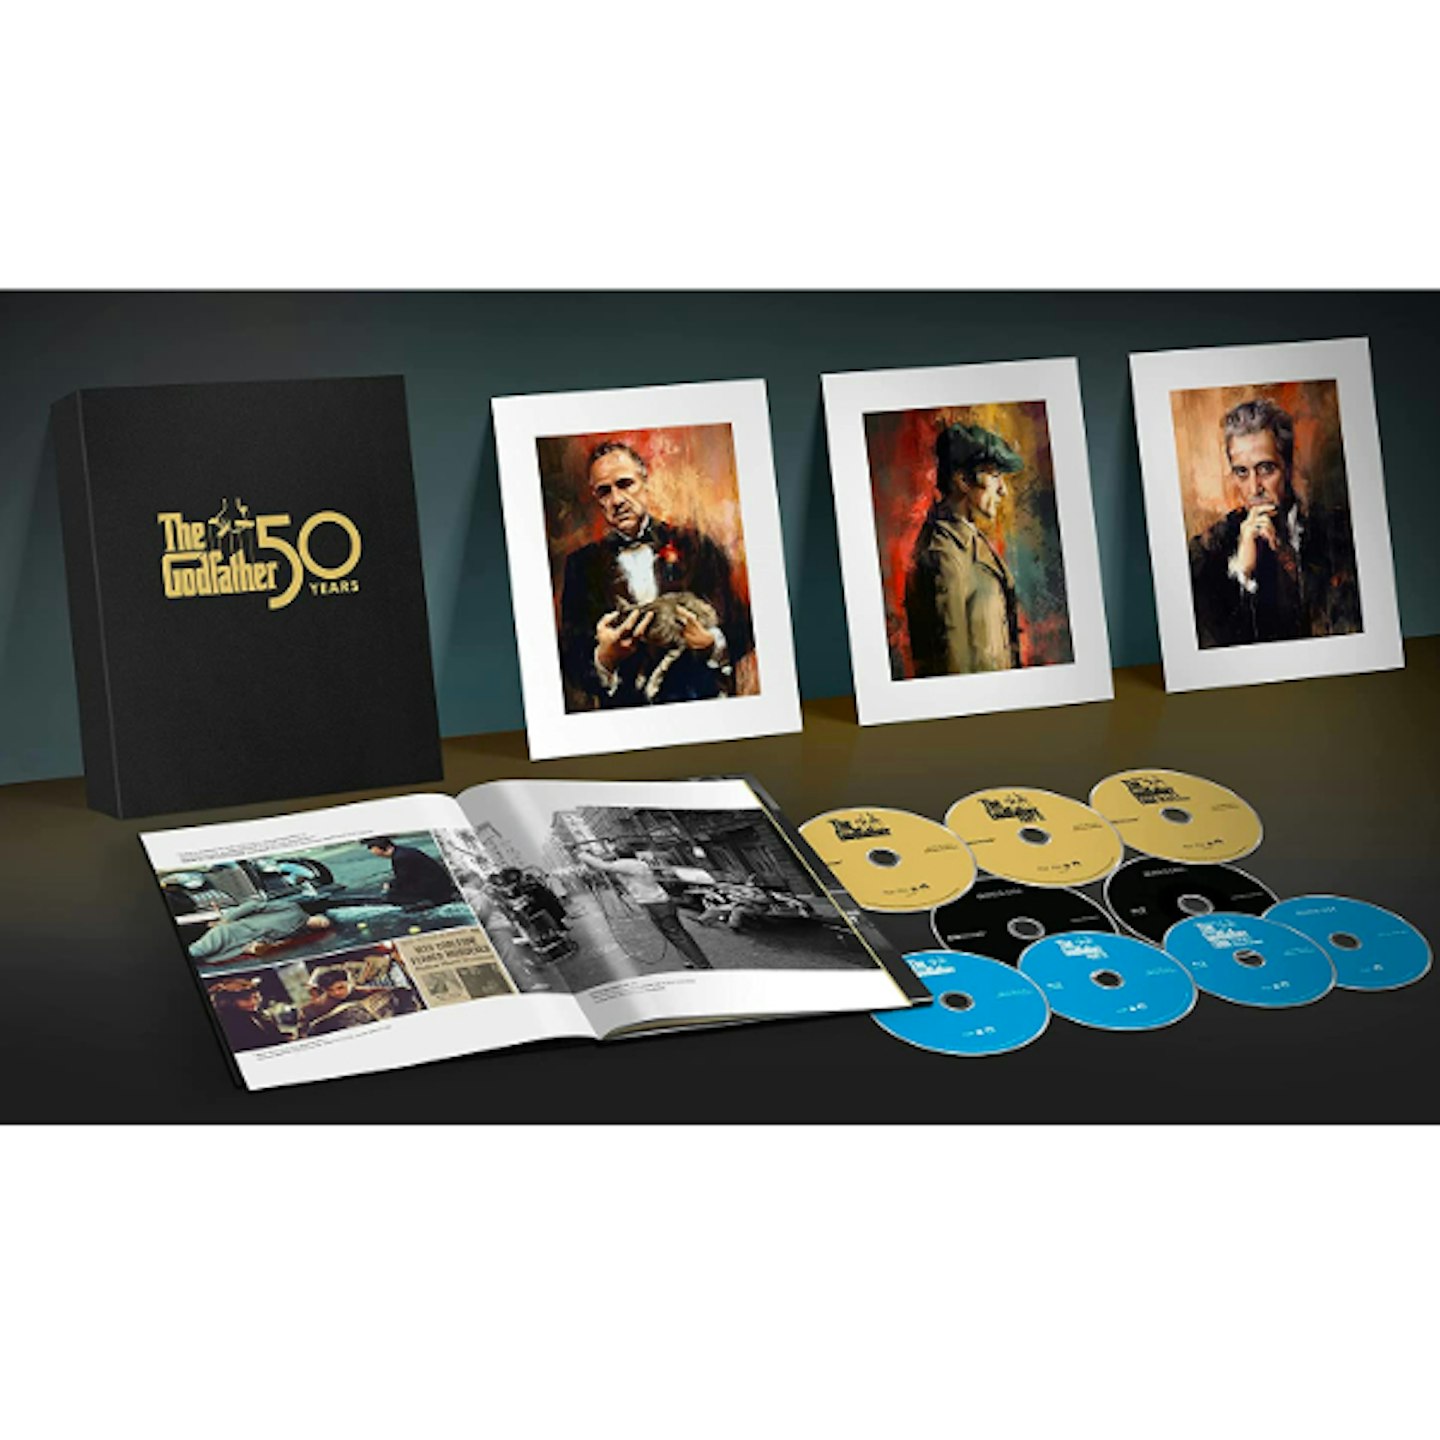 The Godfather Trilogy 50th Anniversary Collectoru2019s Edition